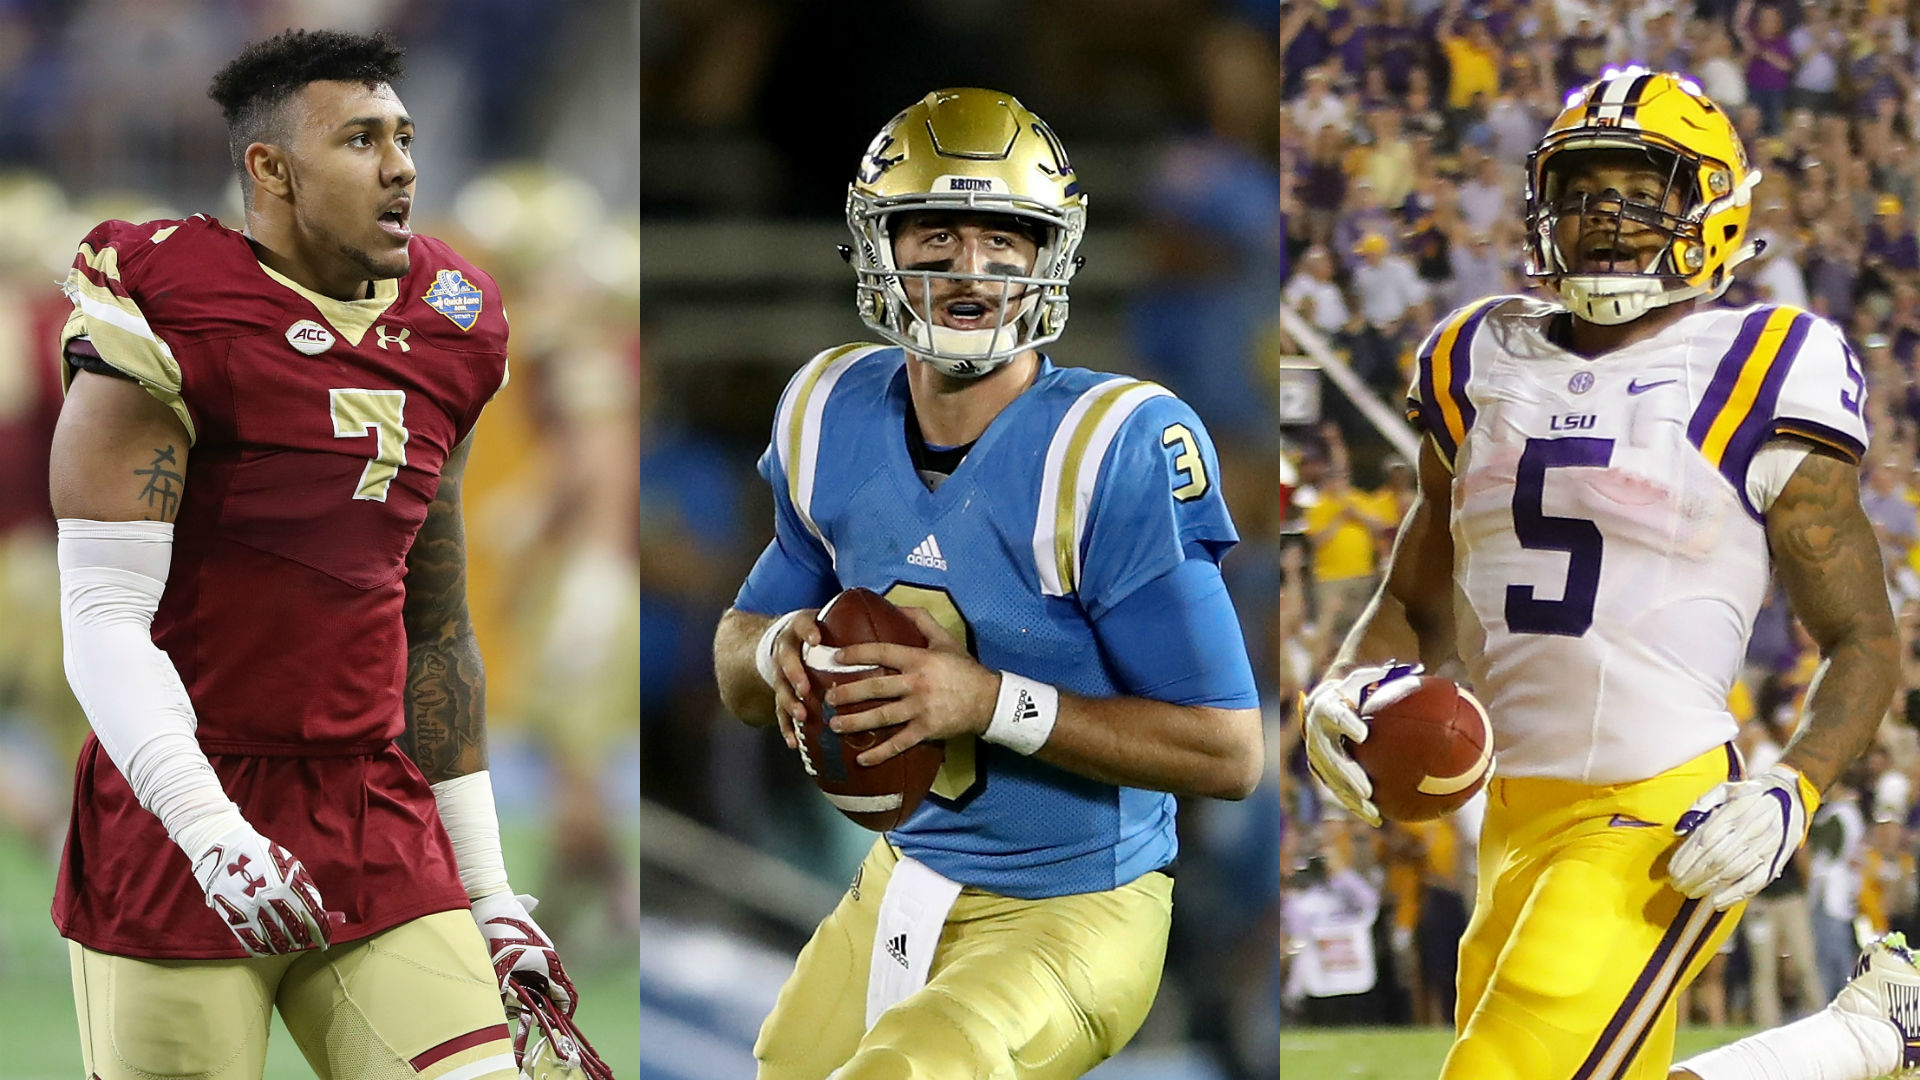 NFL Draft 2018 Best prospects by position to watch this season